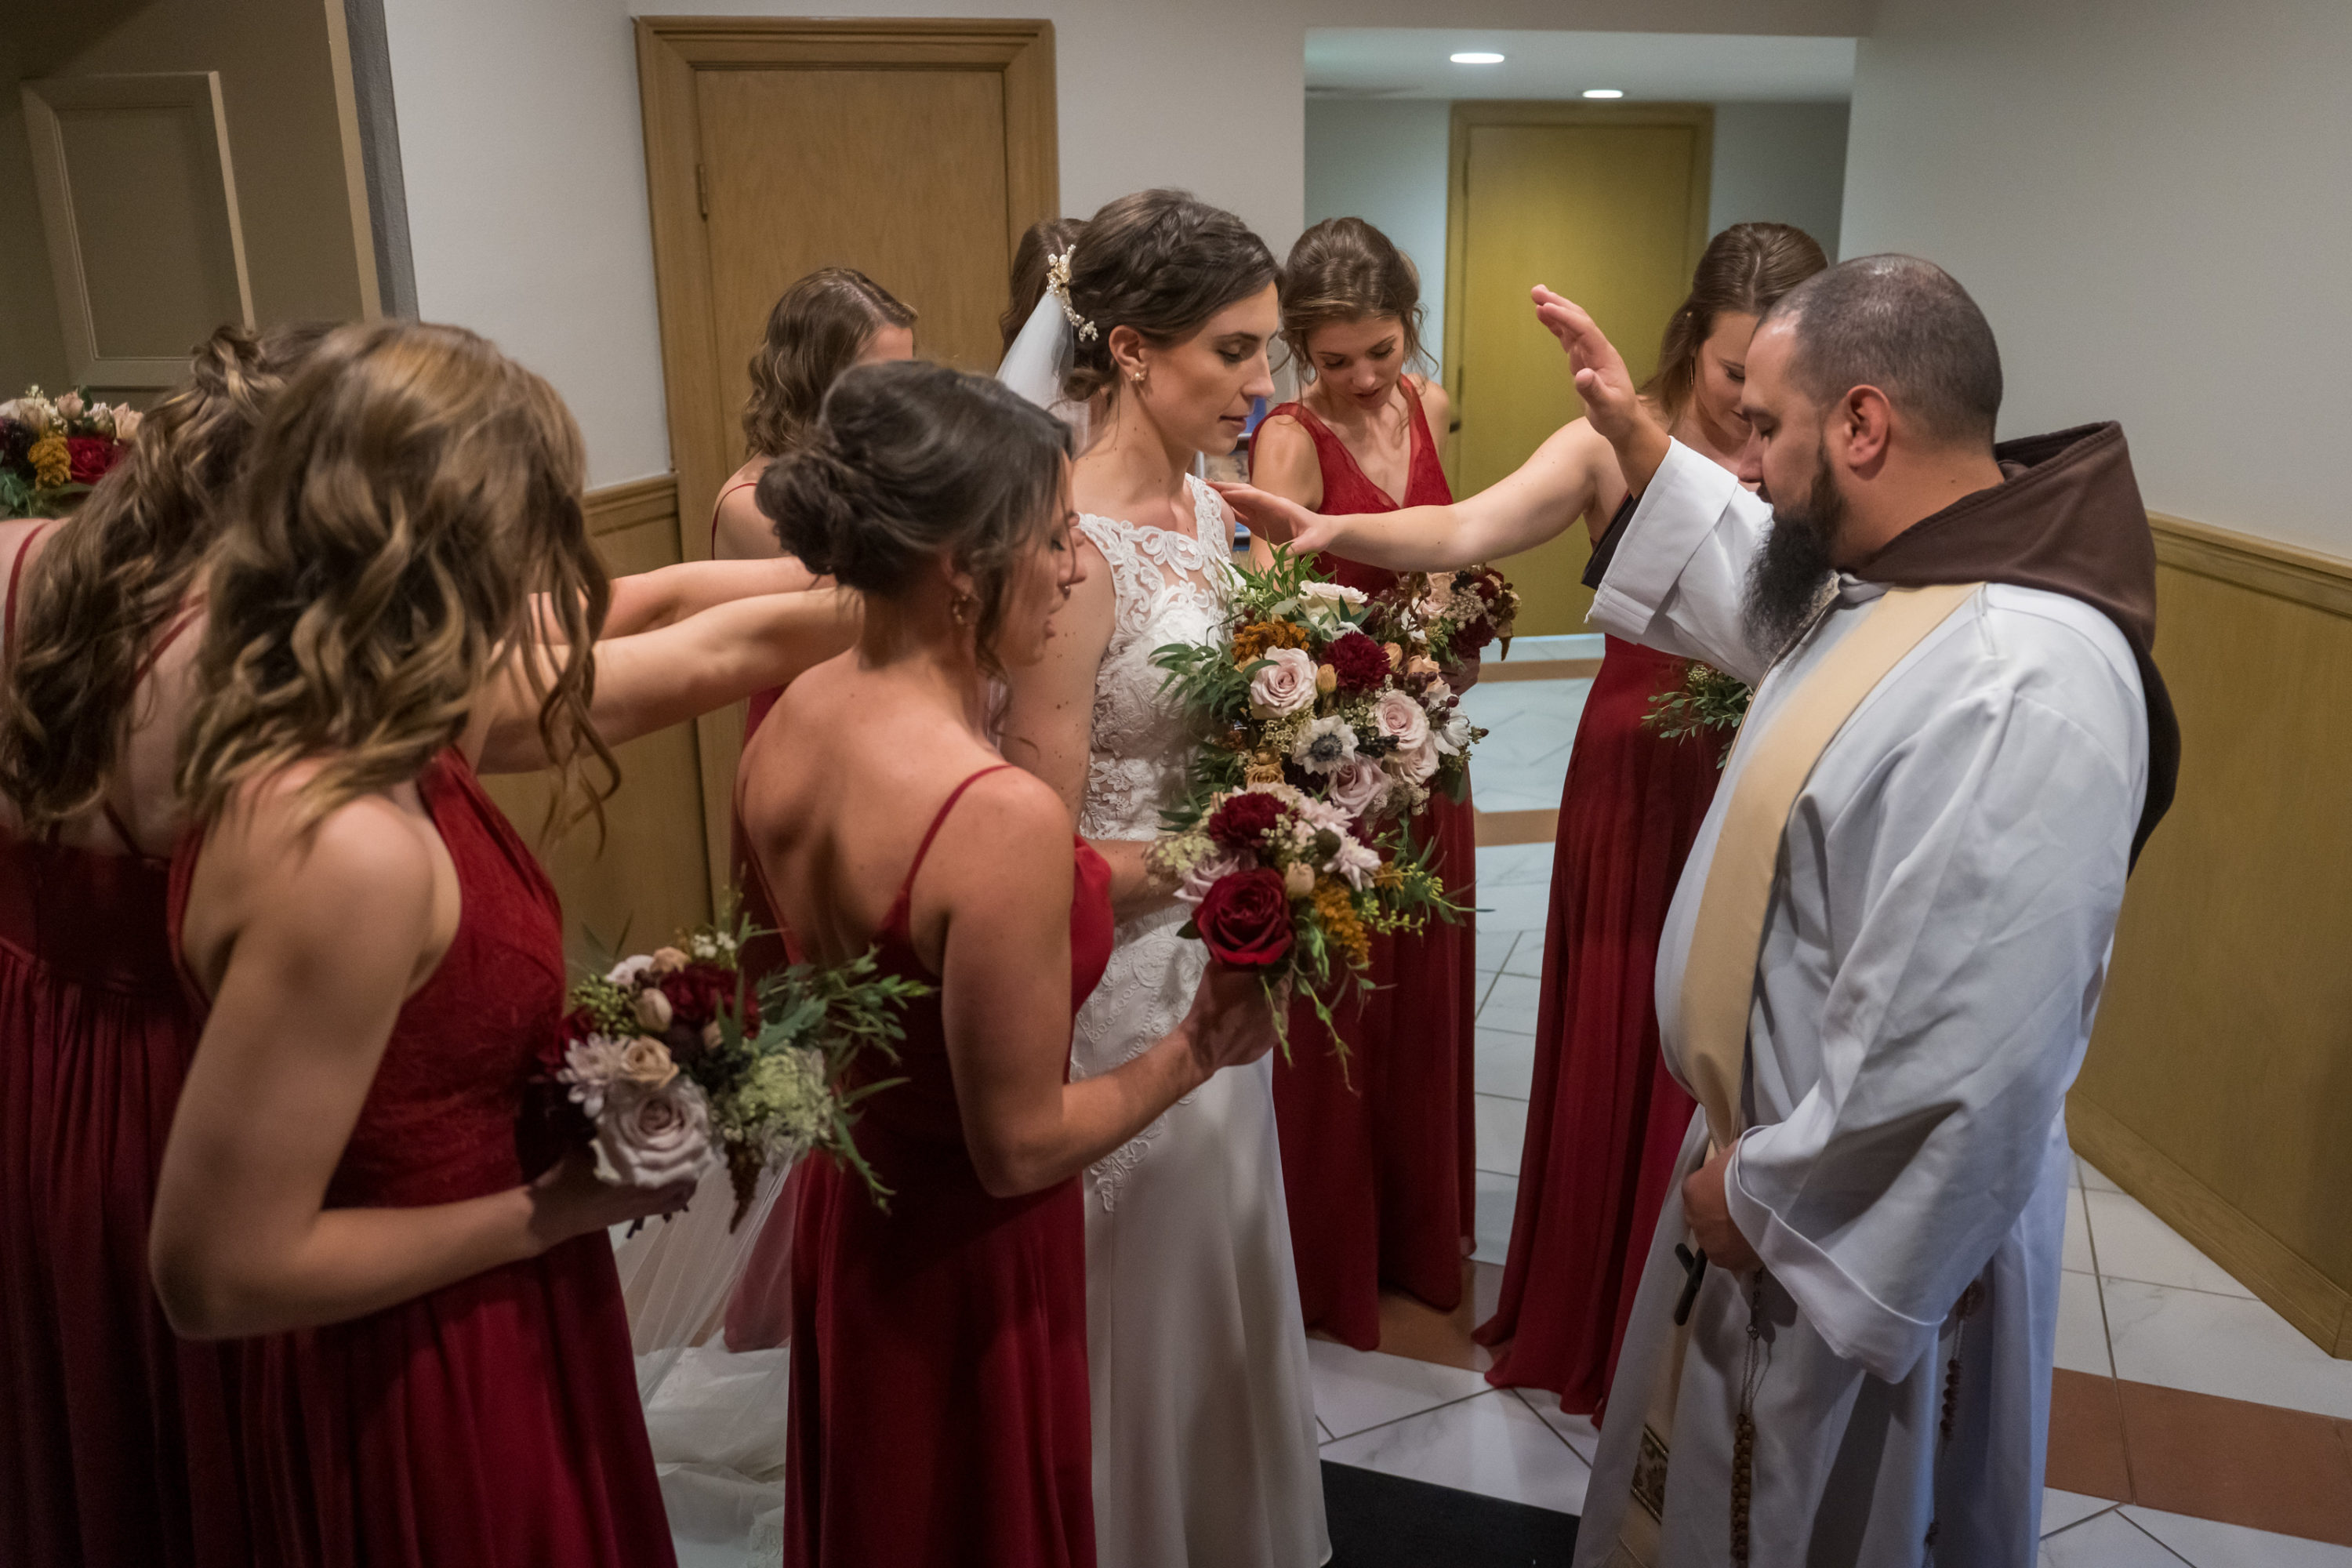 The priest prays over the bride before her Cathedral Basilica of the Immaculate Conception wedding in Denver, Colorado.